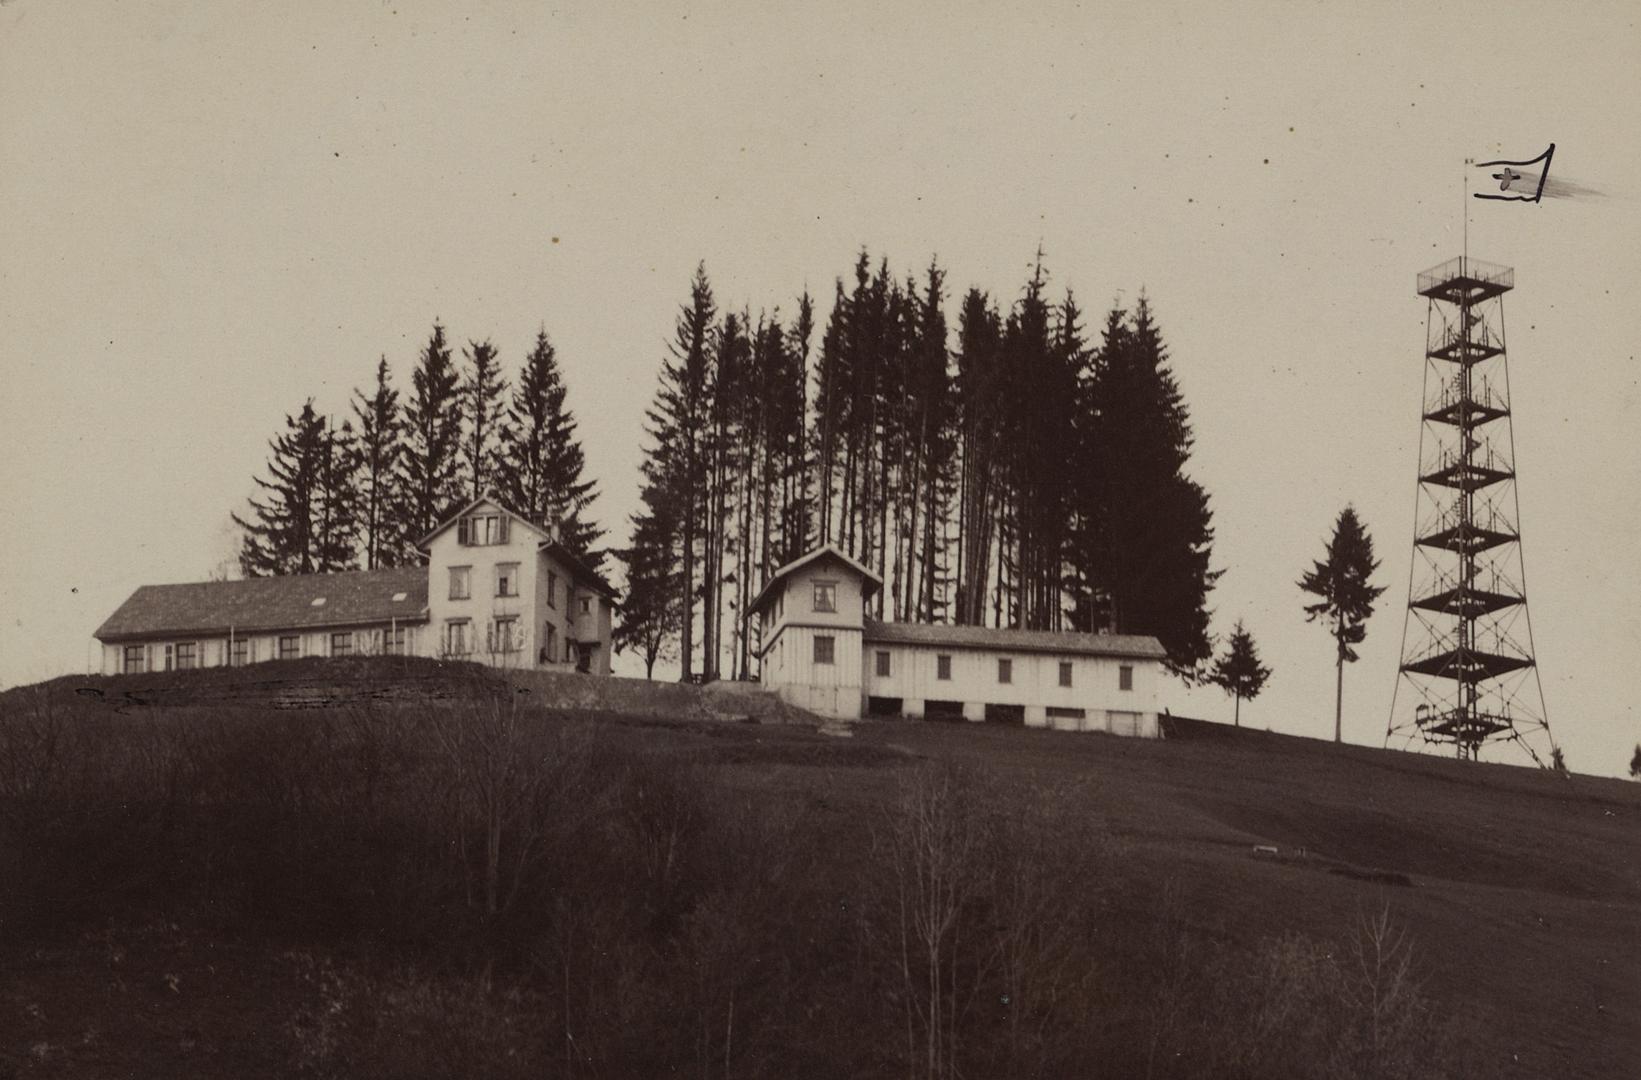 Inn and observation tower on the Bachtel, around 1900. The Swiss flag on the tower has been drawn in by hand (image: Michael Held / ZBZ)